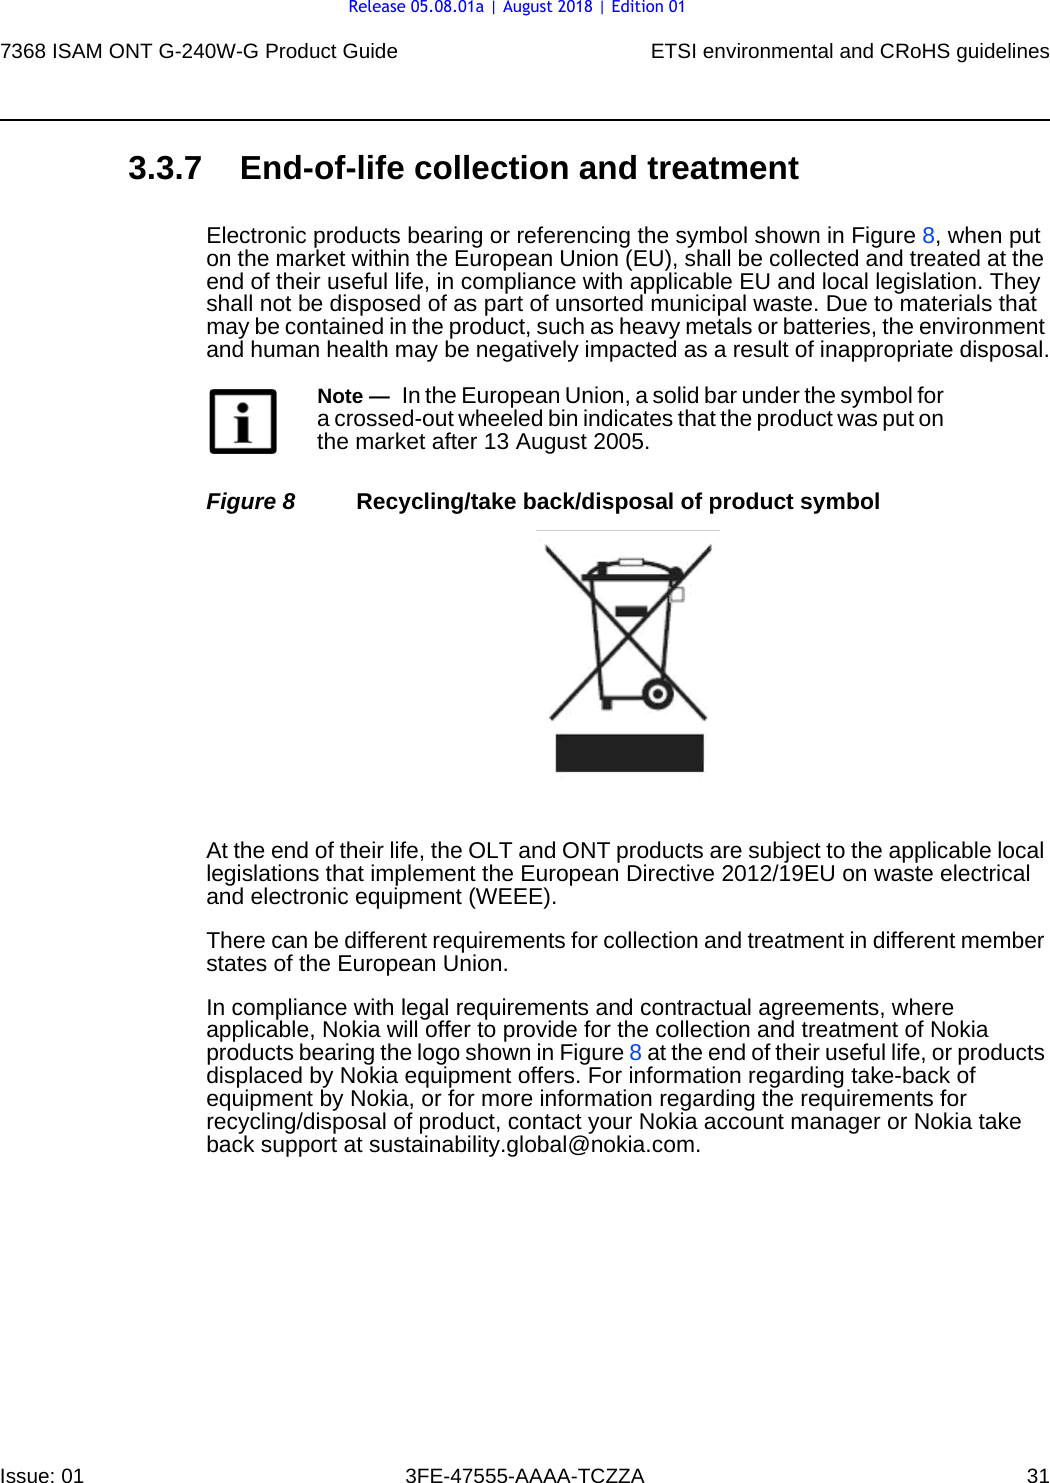 7368 ISAM ONT G-240W-G Product Guide ETSI environmental and CRoHS guidelinesIssue: 01 3FE-47555-AAAA-TCZZA 31 3.3.7 End-of-life collection and treatmentElectronic products bearing or referencing the symbol shown in Figure 8, when put on the market within the European Union (EU), shall be collected and treated at the end of their useful life, in compliance with applicable EU and local legislation. They shall not be disposed of as part of unsorted municipal waste. Due to materials that may be contained in the product, such as heavy metals or batteries, the environment and human health may be negatively impacted as a result of inappropriate disposal.Figure 8 Recycling/take back/disposal of product symbolAt the end of their life, the OLT and ONT products are subject to the applicable local legislations that implement the European Directive 2012/19EU on waste electrical and electronic equipment (WEEE).There can be different requirements for collection and treatment in different member states of the European Union. In compliance with legal requirements and contractual agreements, where applicable, Nokia will offer to provide for the collection and treatment of Nokia products bearing the logo shown in Figure 8 at the end of their useful life, or products displaced by Nokia equipment offers. For information regarding take-back of equipment by Nokia, or for more information regarding the requirements for recycling/disposal of product, contact your Nokia account manager or Nokia take back support at sustainability.global@nokia.com.Note —  In the European Union, a solid bar under the symbol for a crossed-out wheeled bin indicates that the product was put on the market after 13 August 2005.Release 05.08.01a | August 2018 | Edition 01